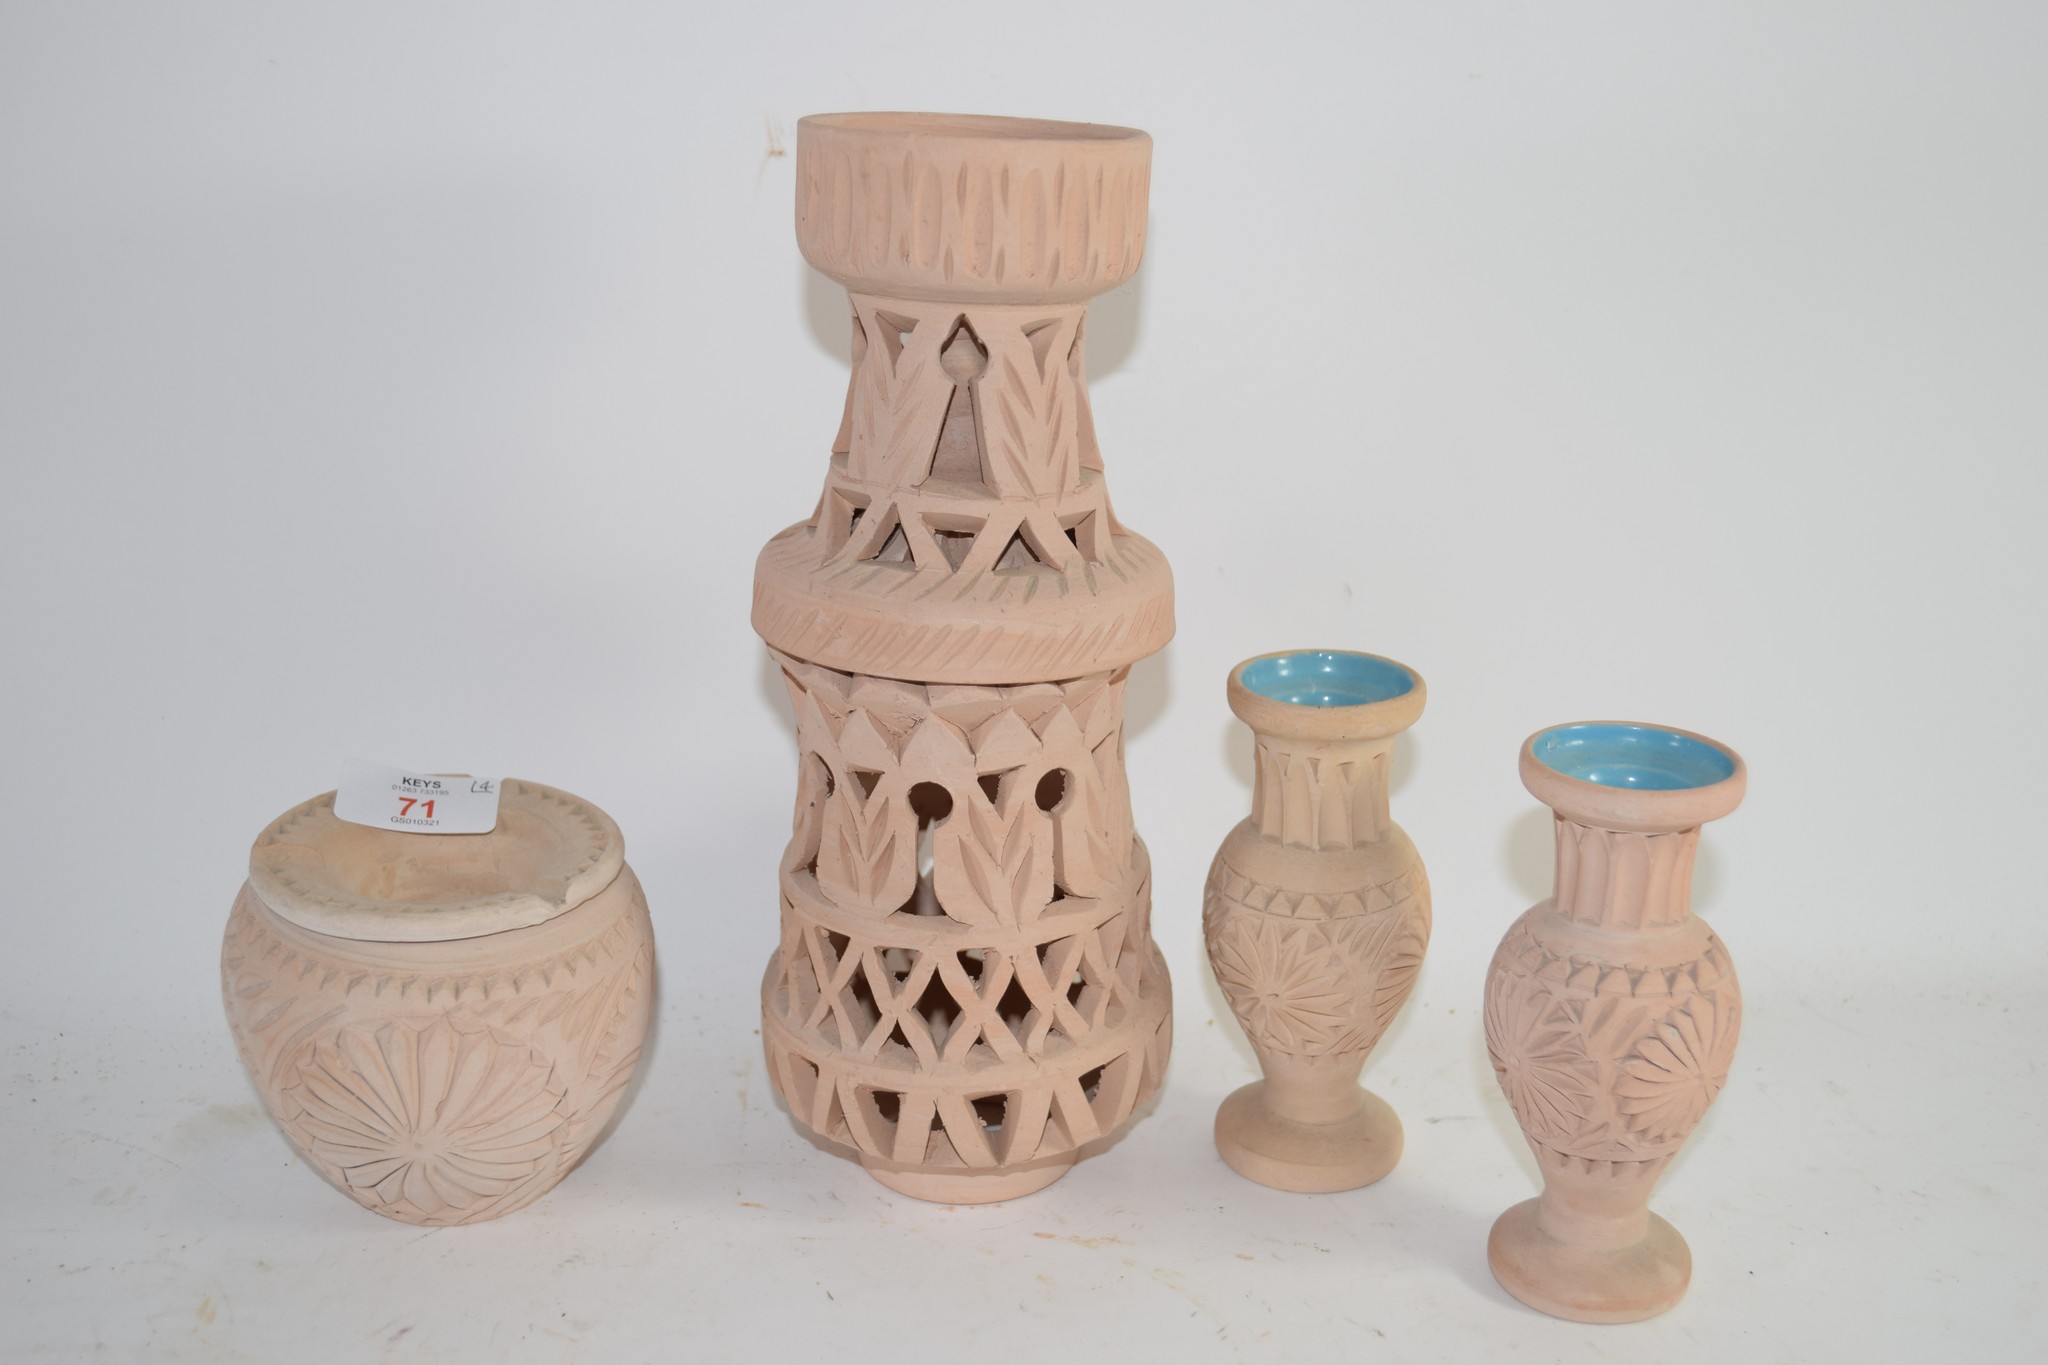 GROUP OF POTTERY PEIRCED VASES